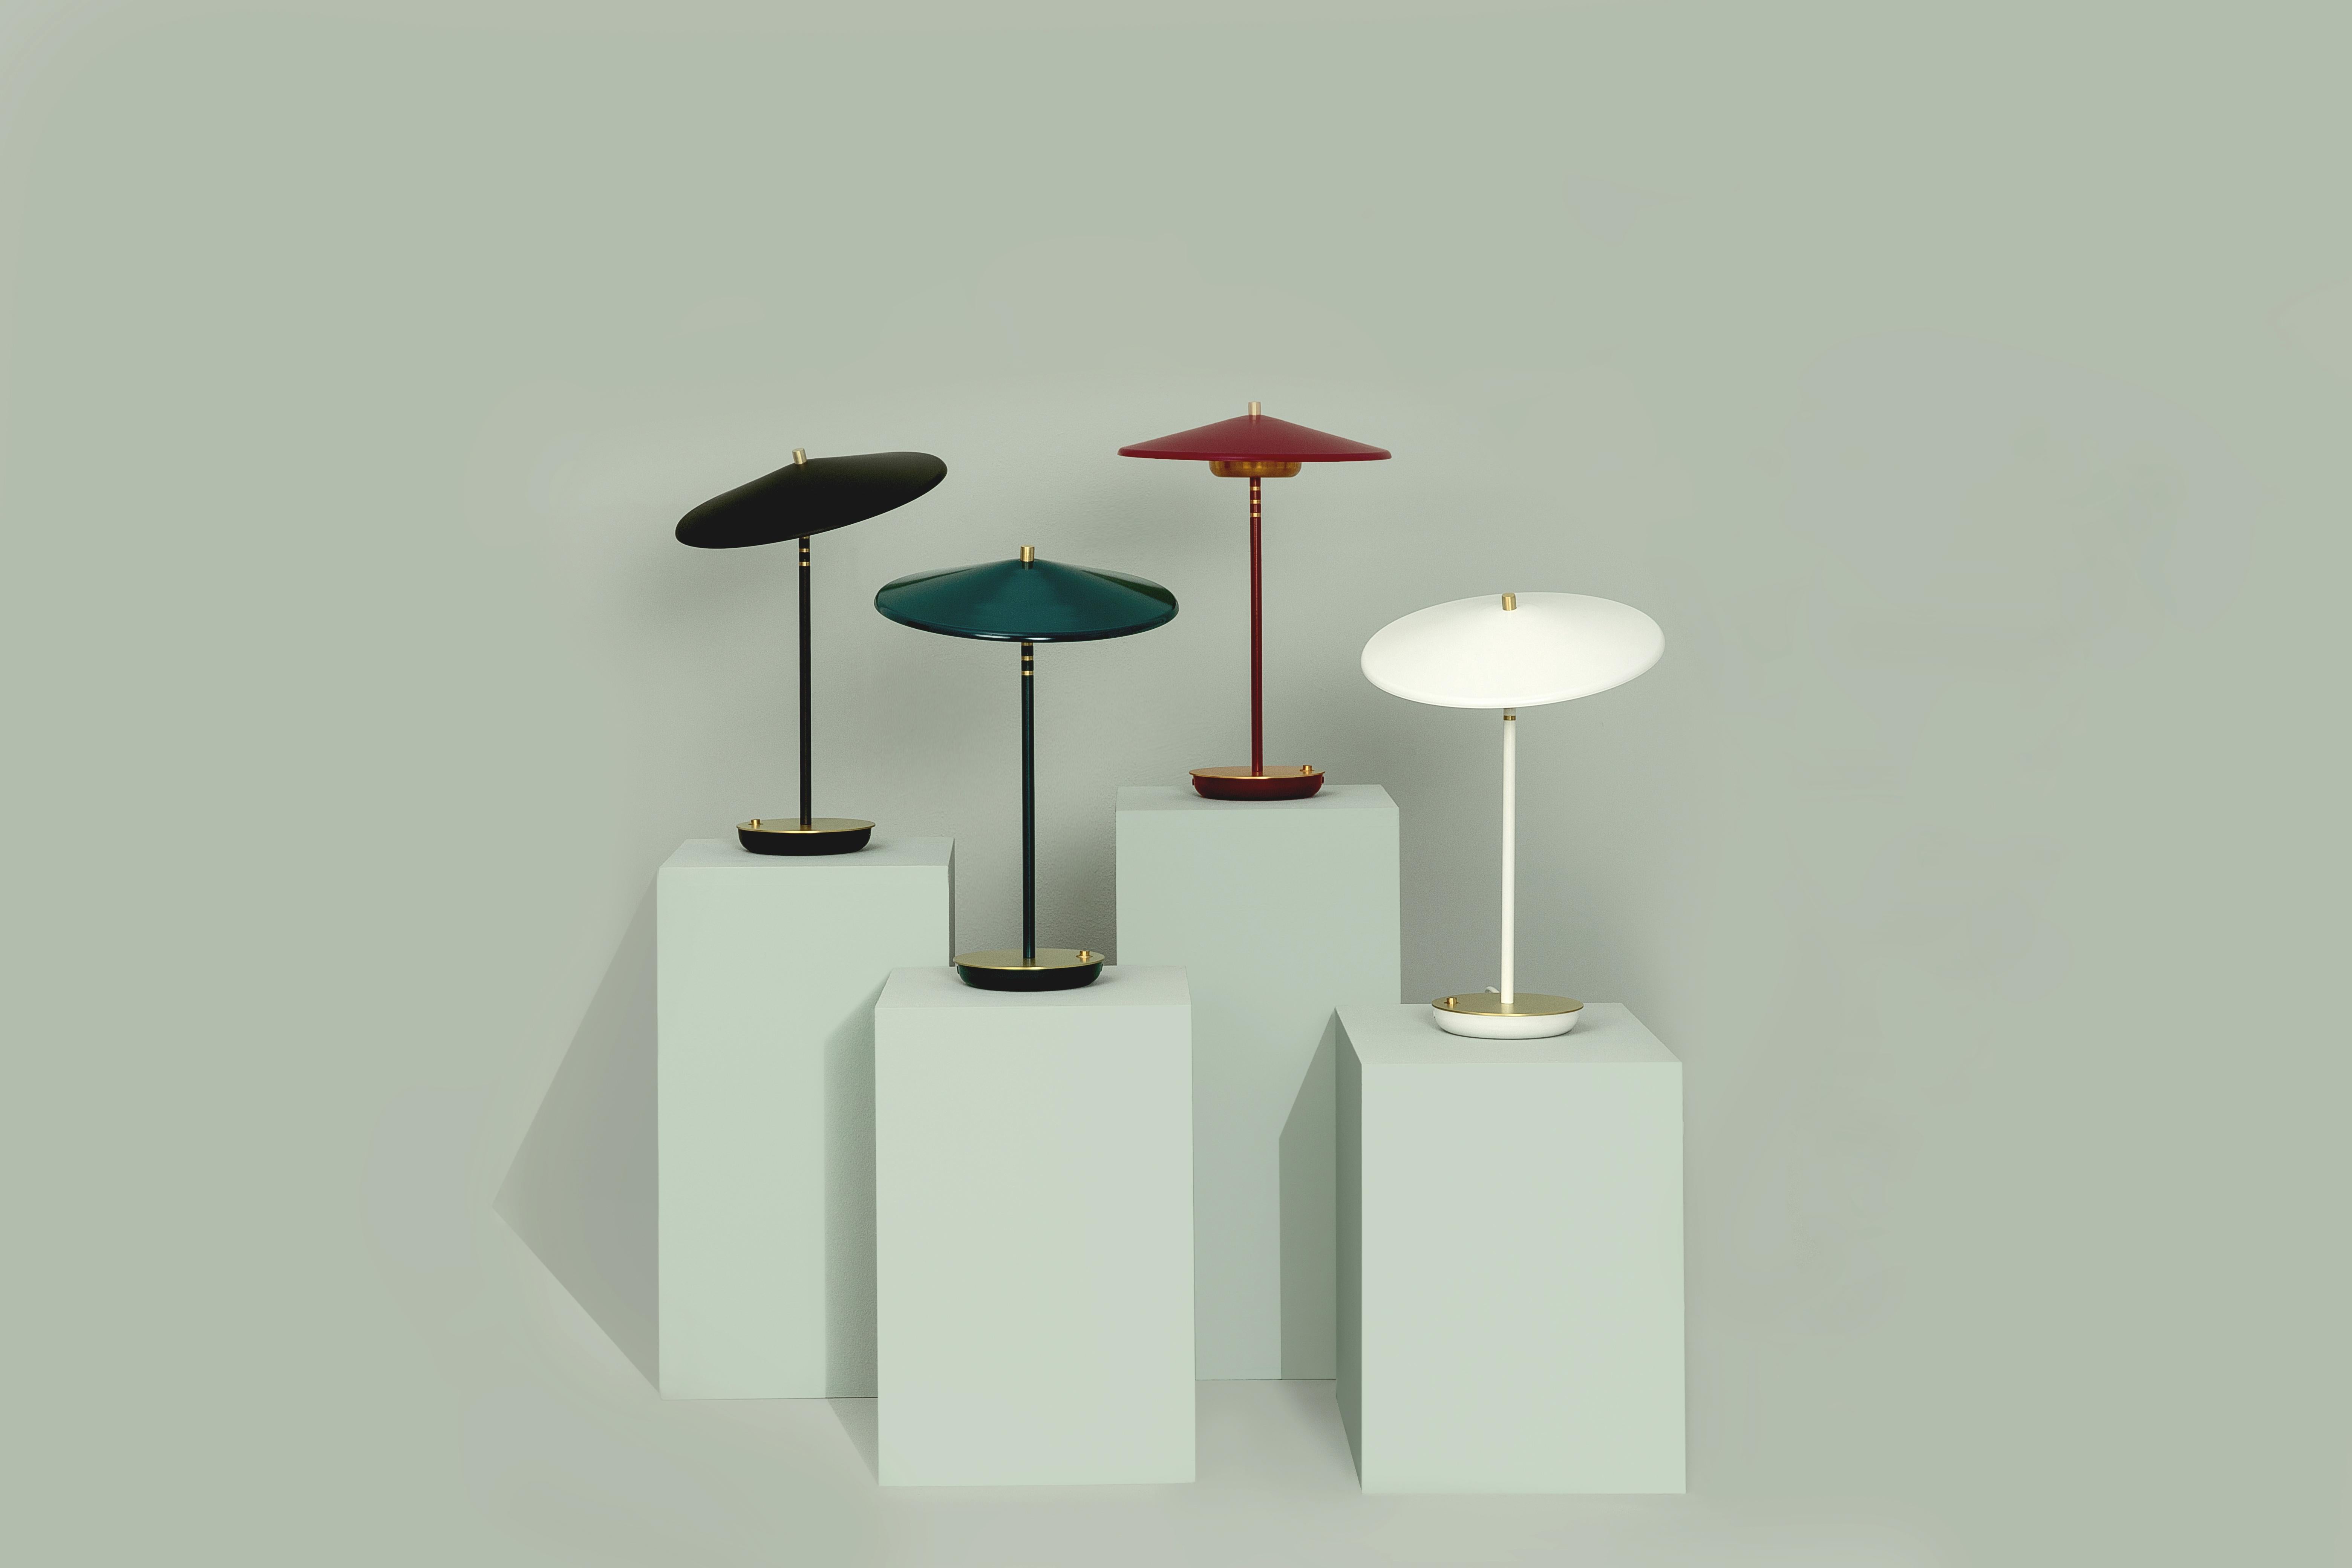 Hand-Crafted Artist Lamp, Sacramento Color, SaloneSatellite Exhibition Product